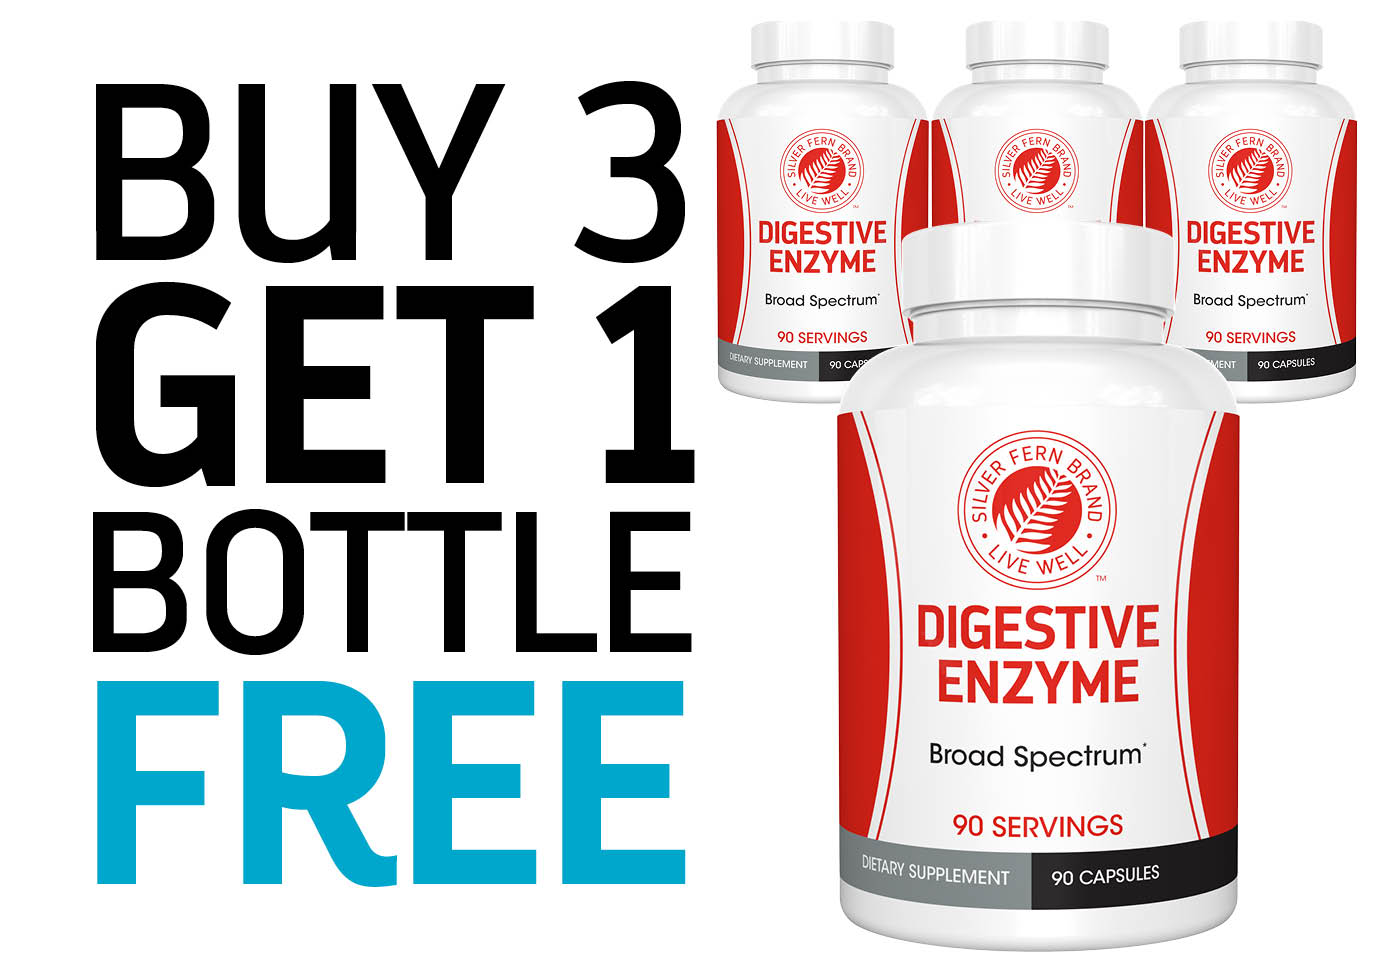 Digestive Enzyme with 100% pH Coverage - 90 Servings